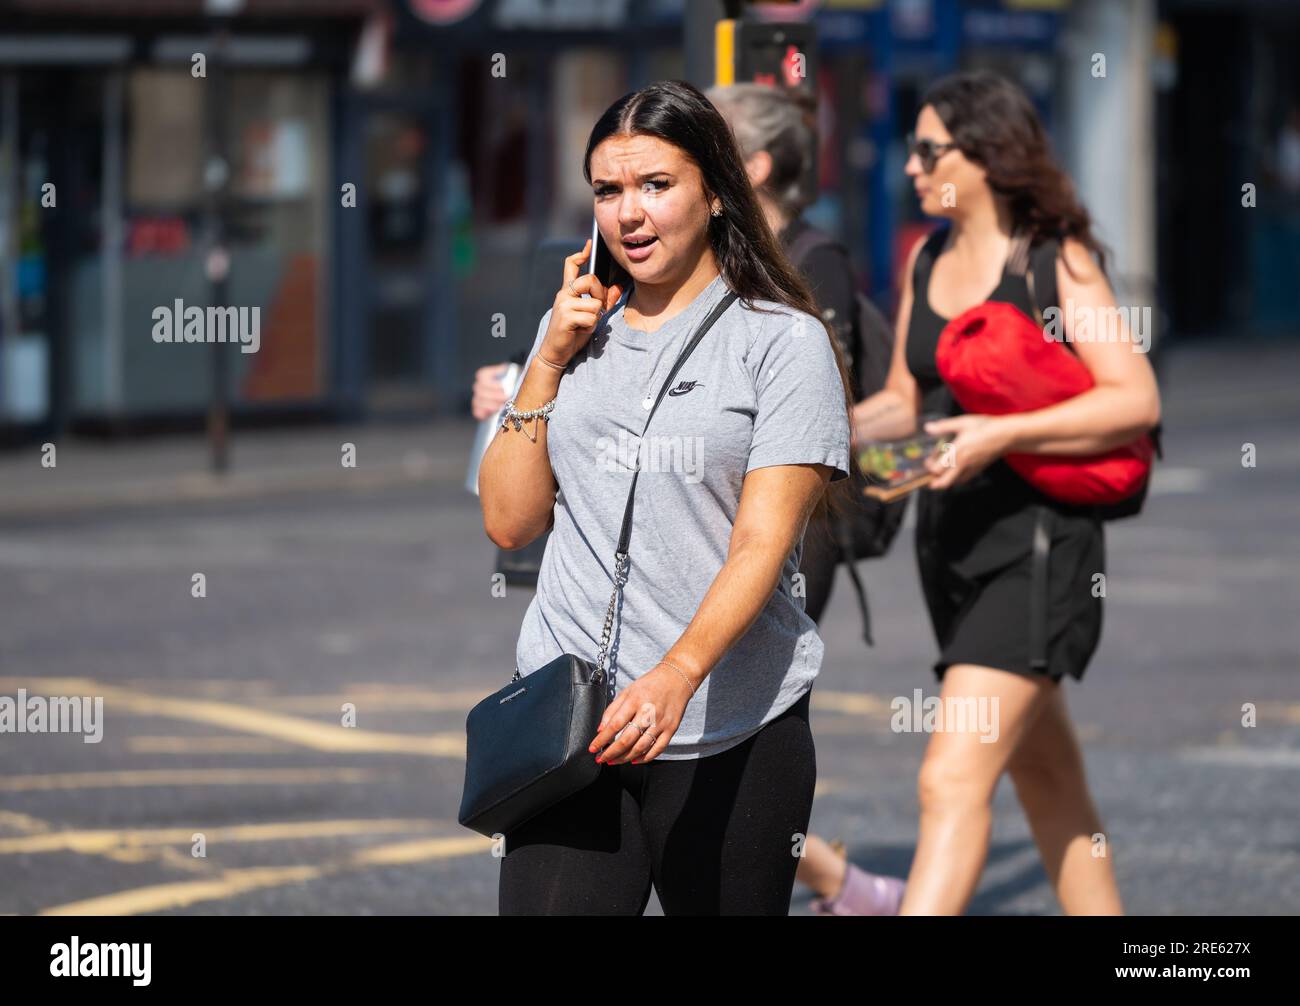 Young woman walking in busy urban area speaking on a mobile phone or cell phone, in Summer in England, UK. Stock Photo